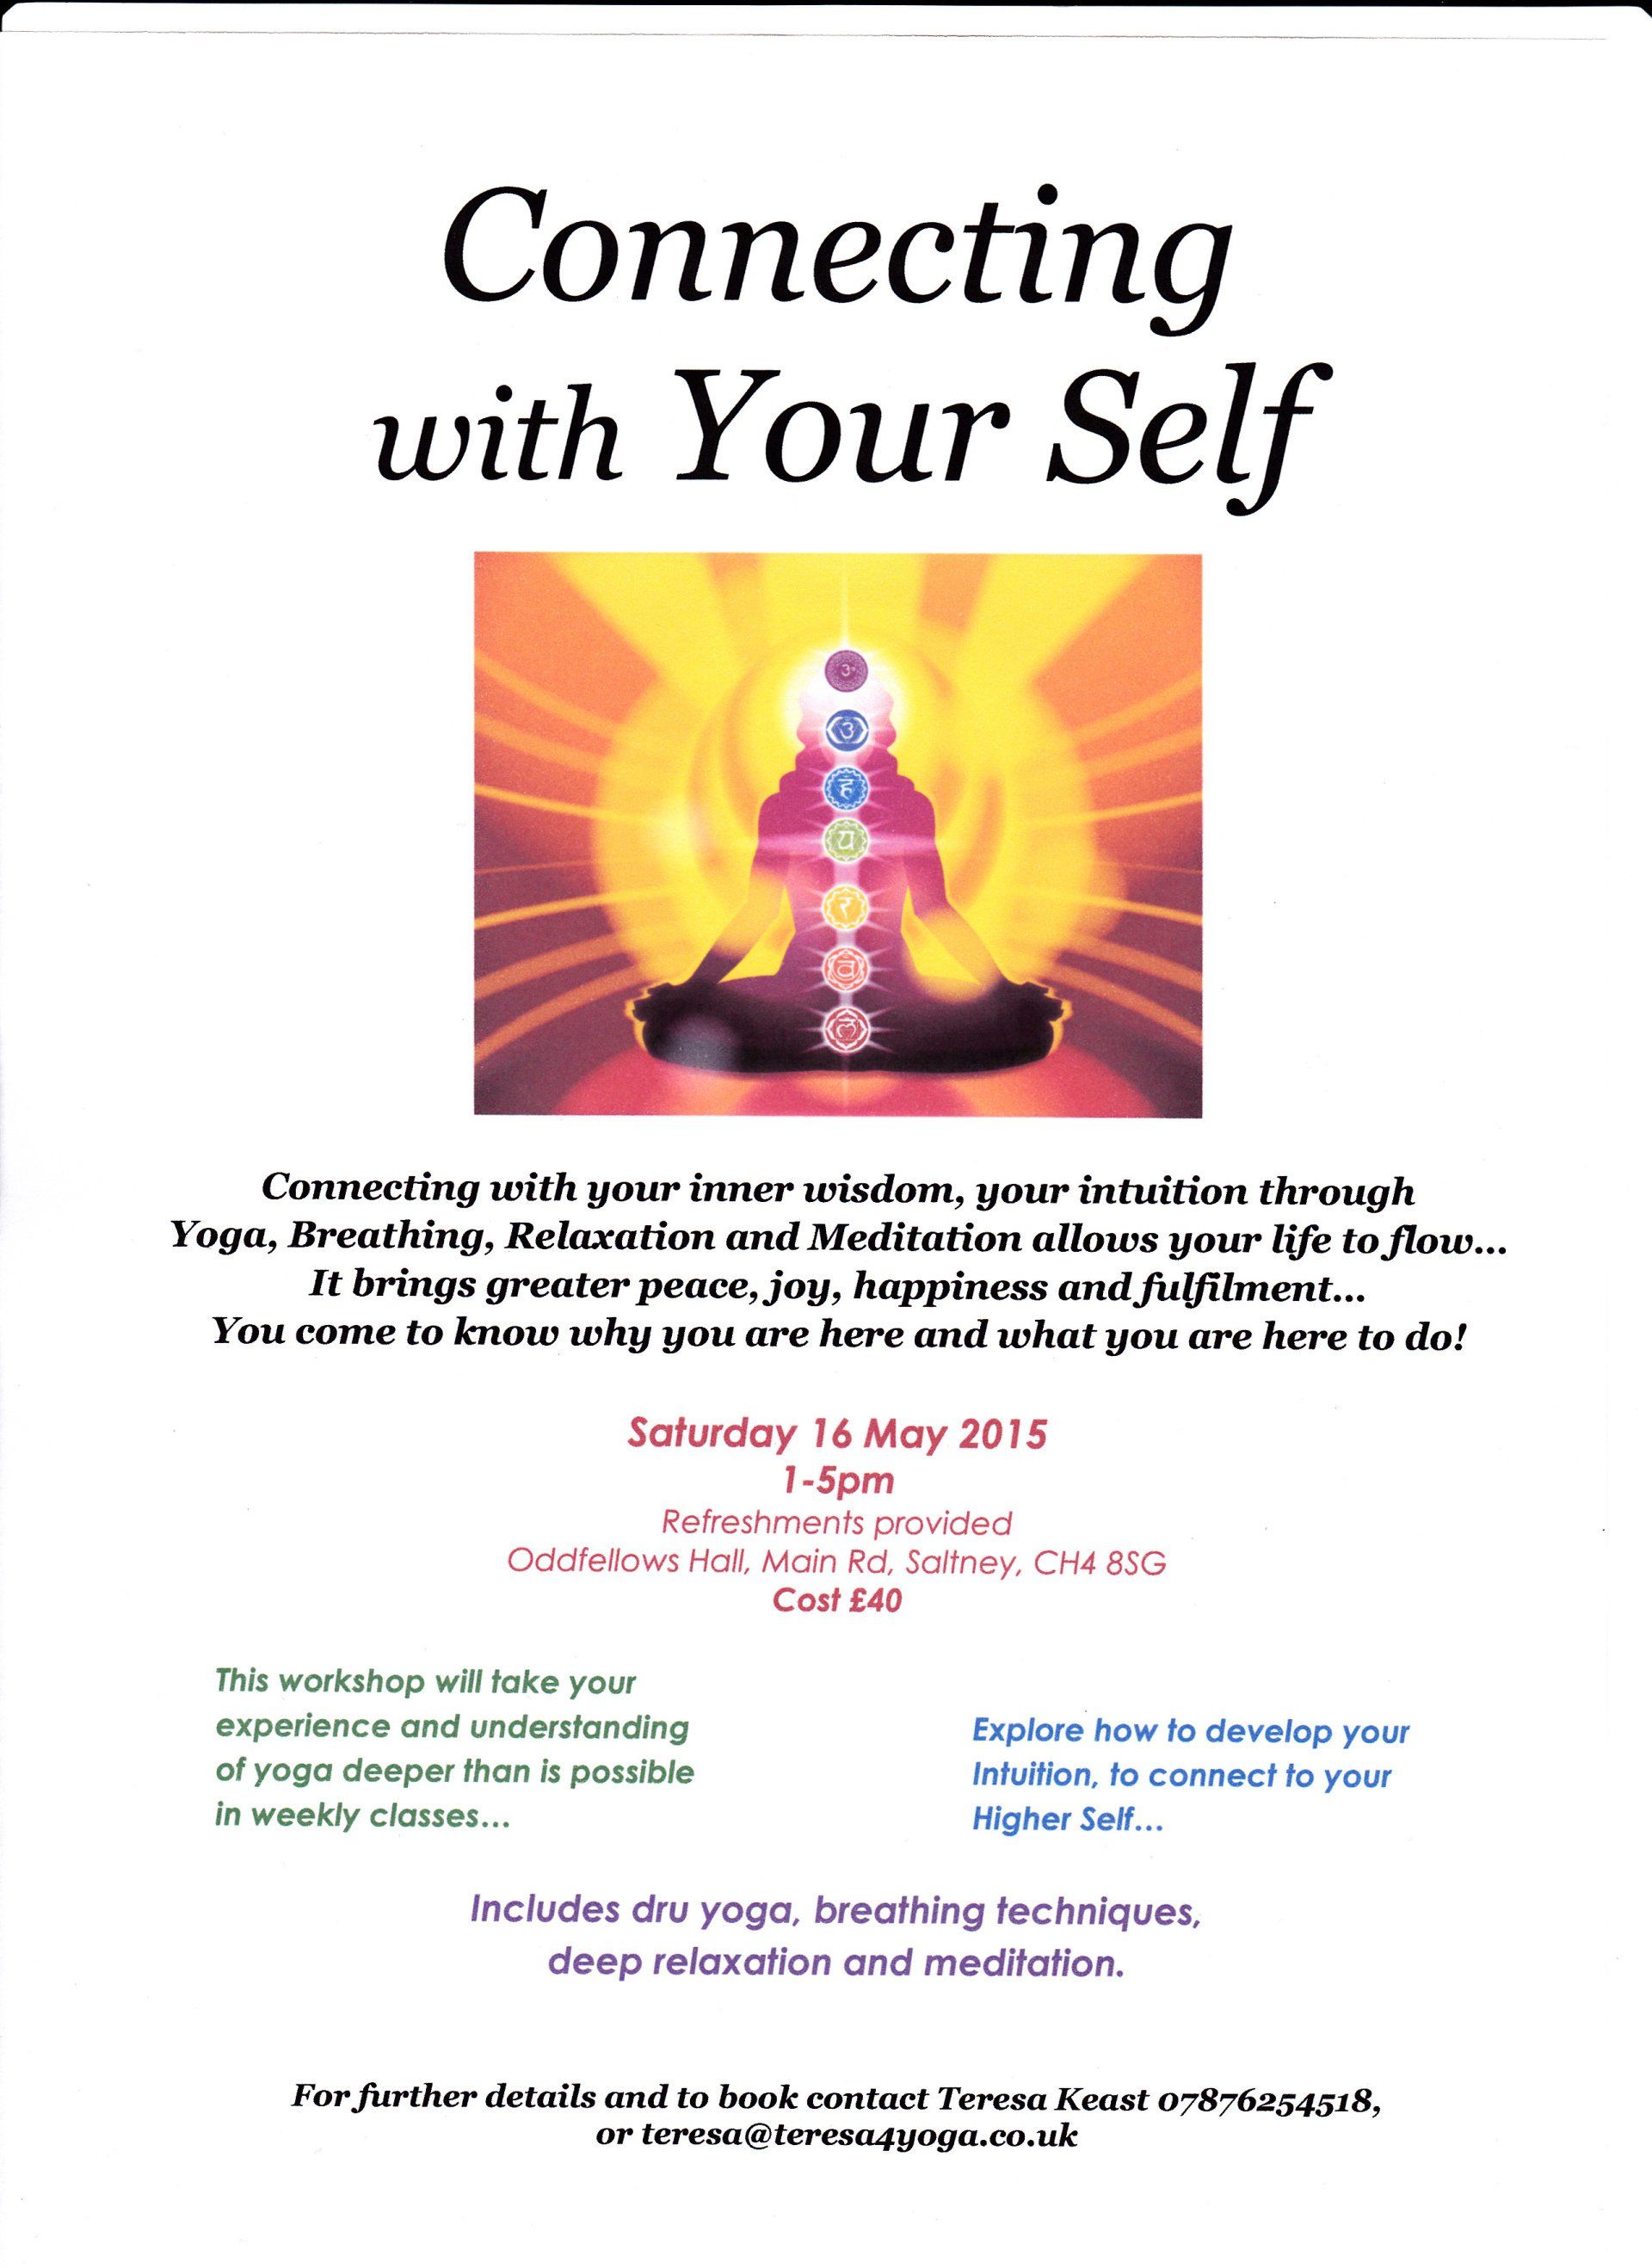 Teresa4Yoga Connecting with your Self workshop